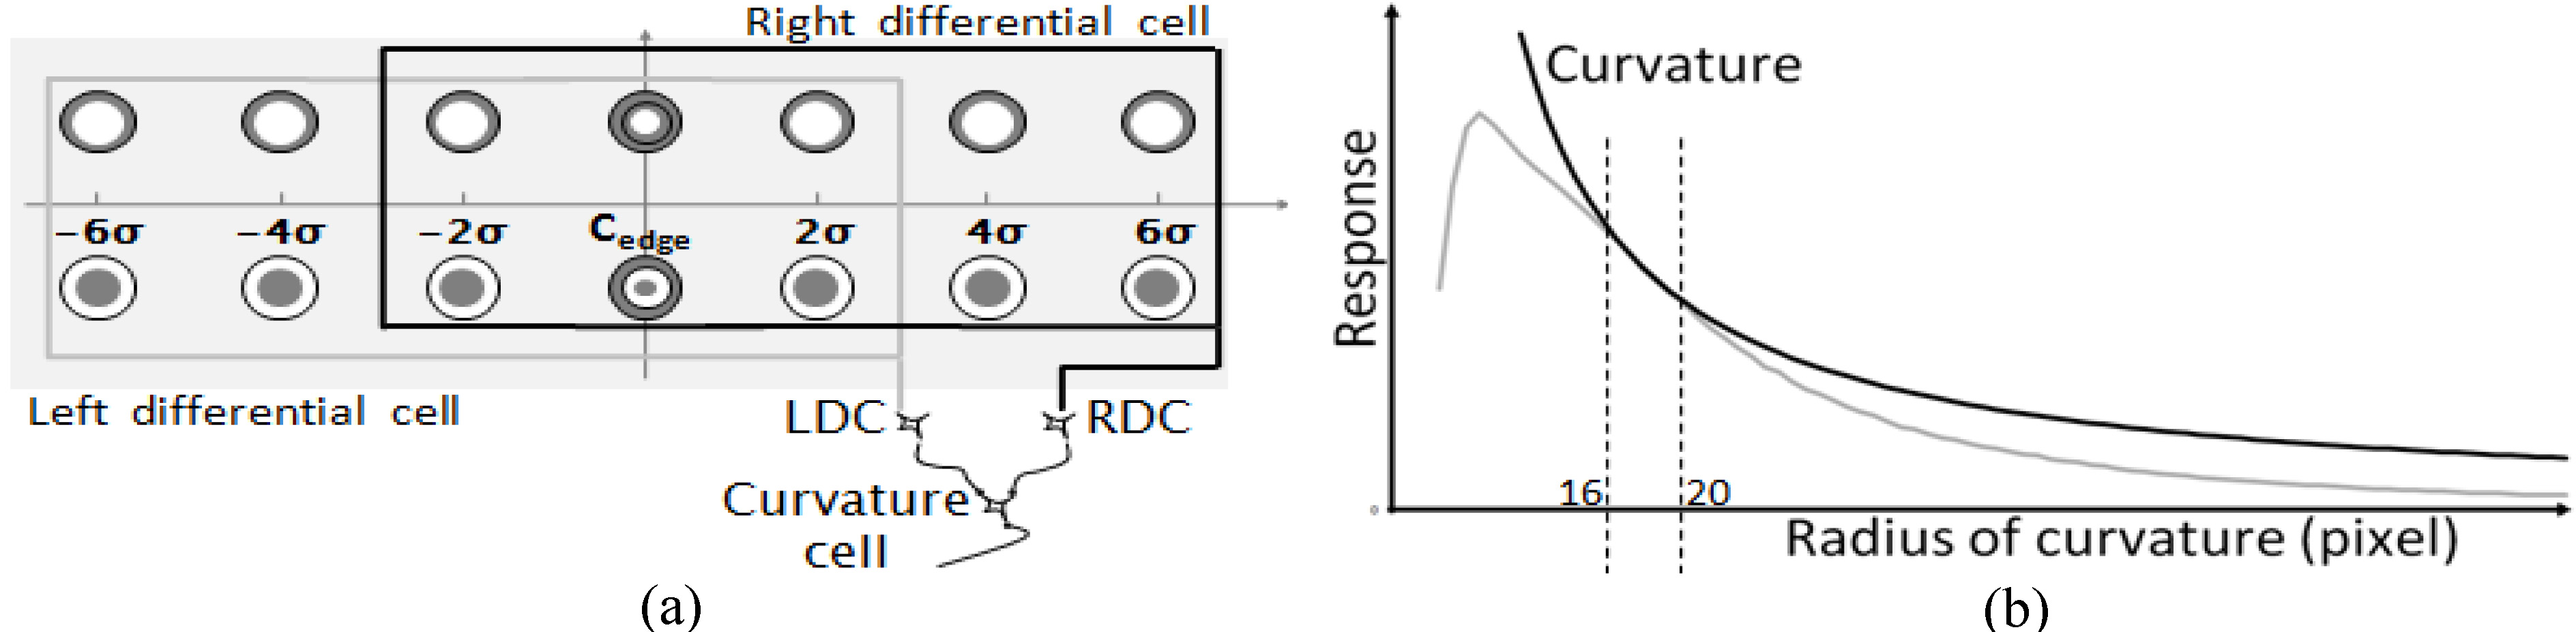 A schematic model of the receptive field of a curvature cell and its response to curved edges. (a) There are two types of differential cells according to locations of inhibitory regions. The curvature cell receives projections from both RDC and LDC (where RDC indicates a differential cell with its inhibition region on the right-hand side, and LDC a differential cell with its inhibition region on the left-hand side). (b) Response of the curvature cell to curved edges. When the radius of curvature is r, the modified curvature is equal to α/r.